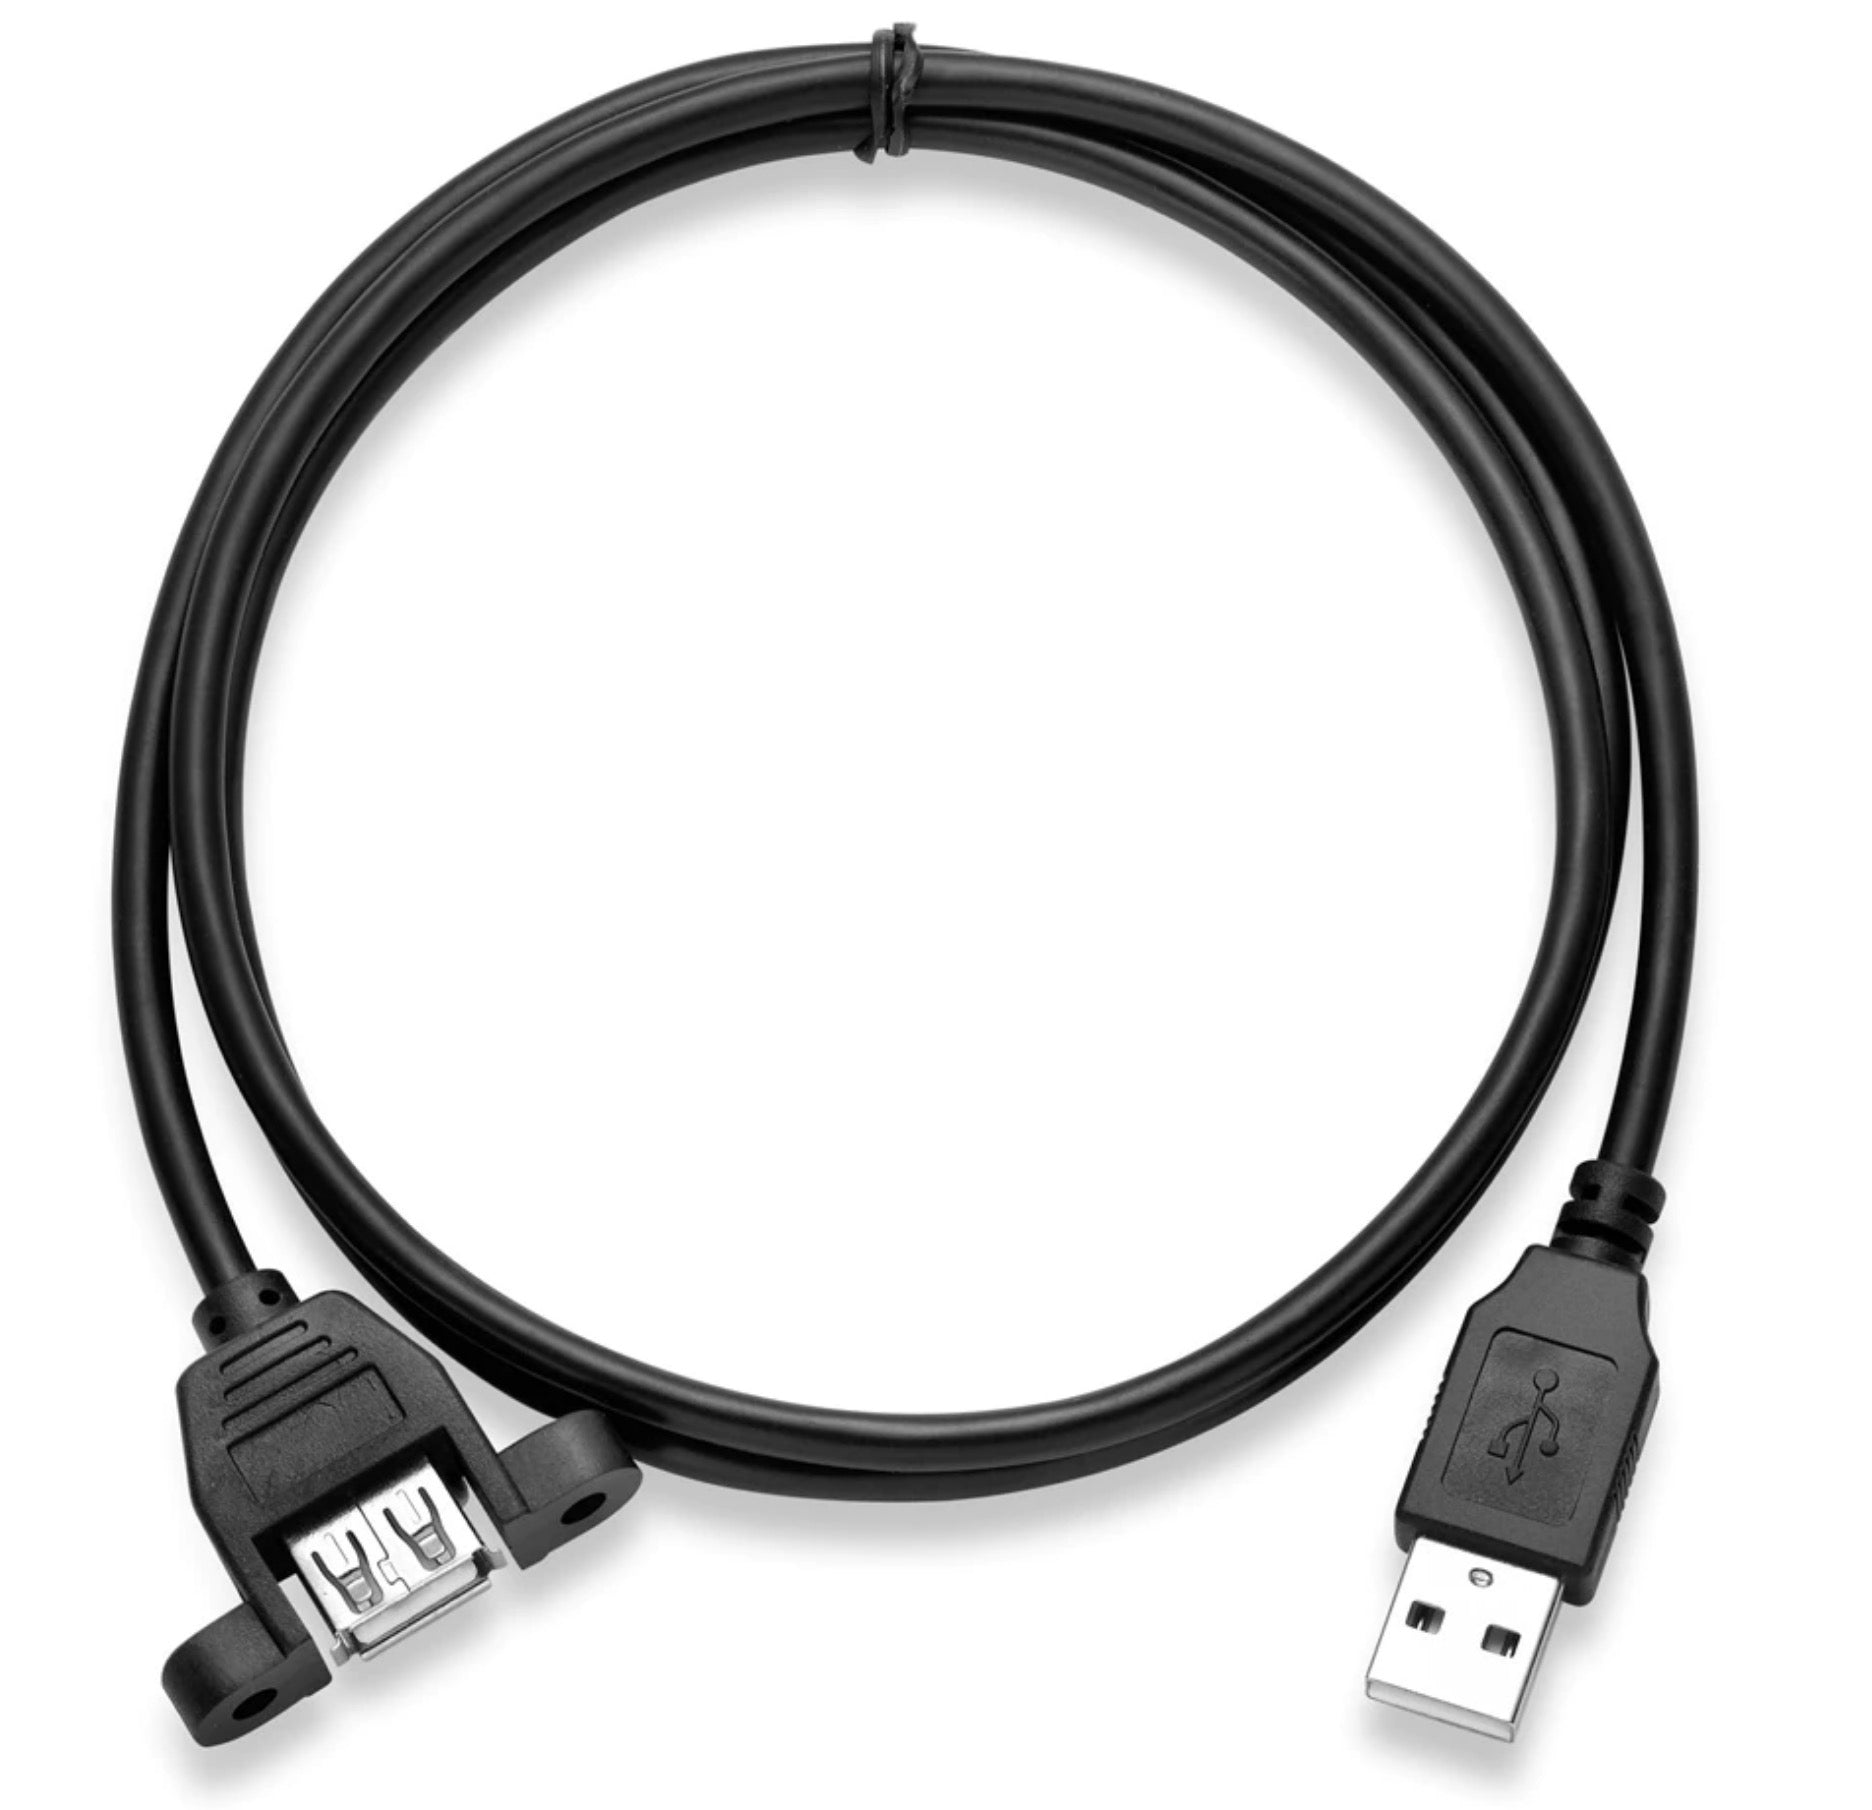 USB 2.0 Type A Male to Female Panel Mount Cable